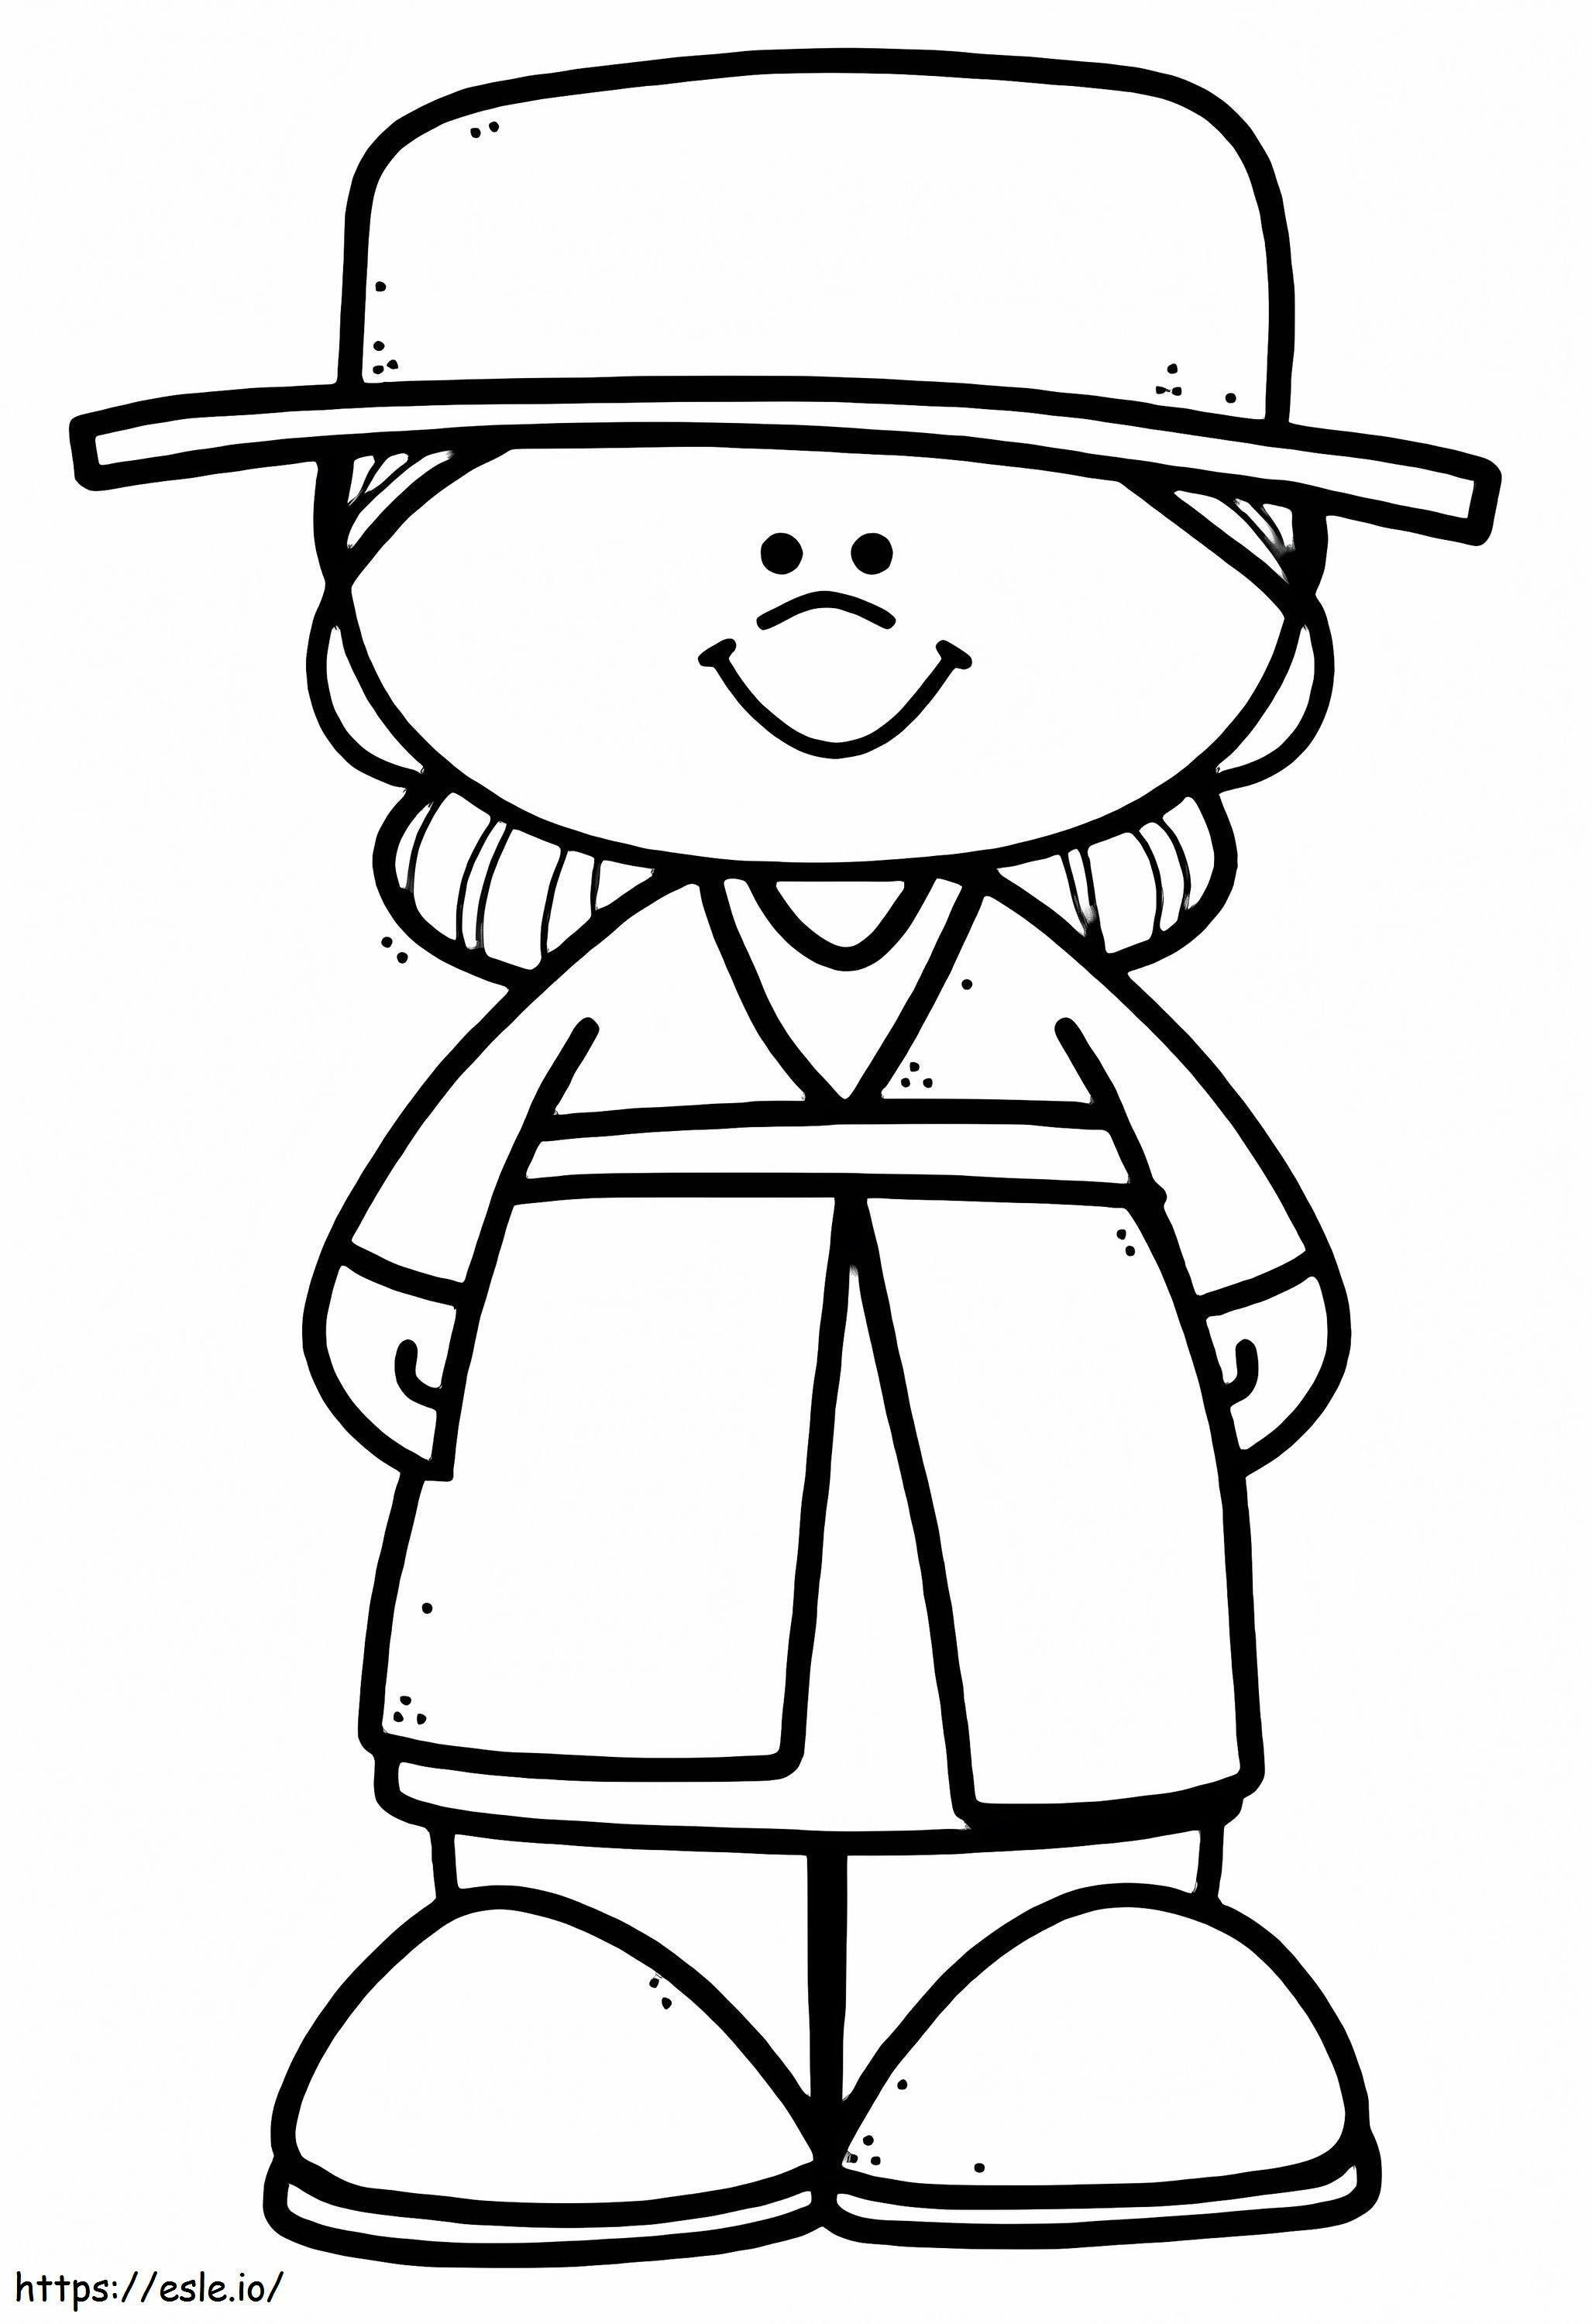 Chilean Woman coloring page